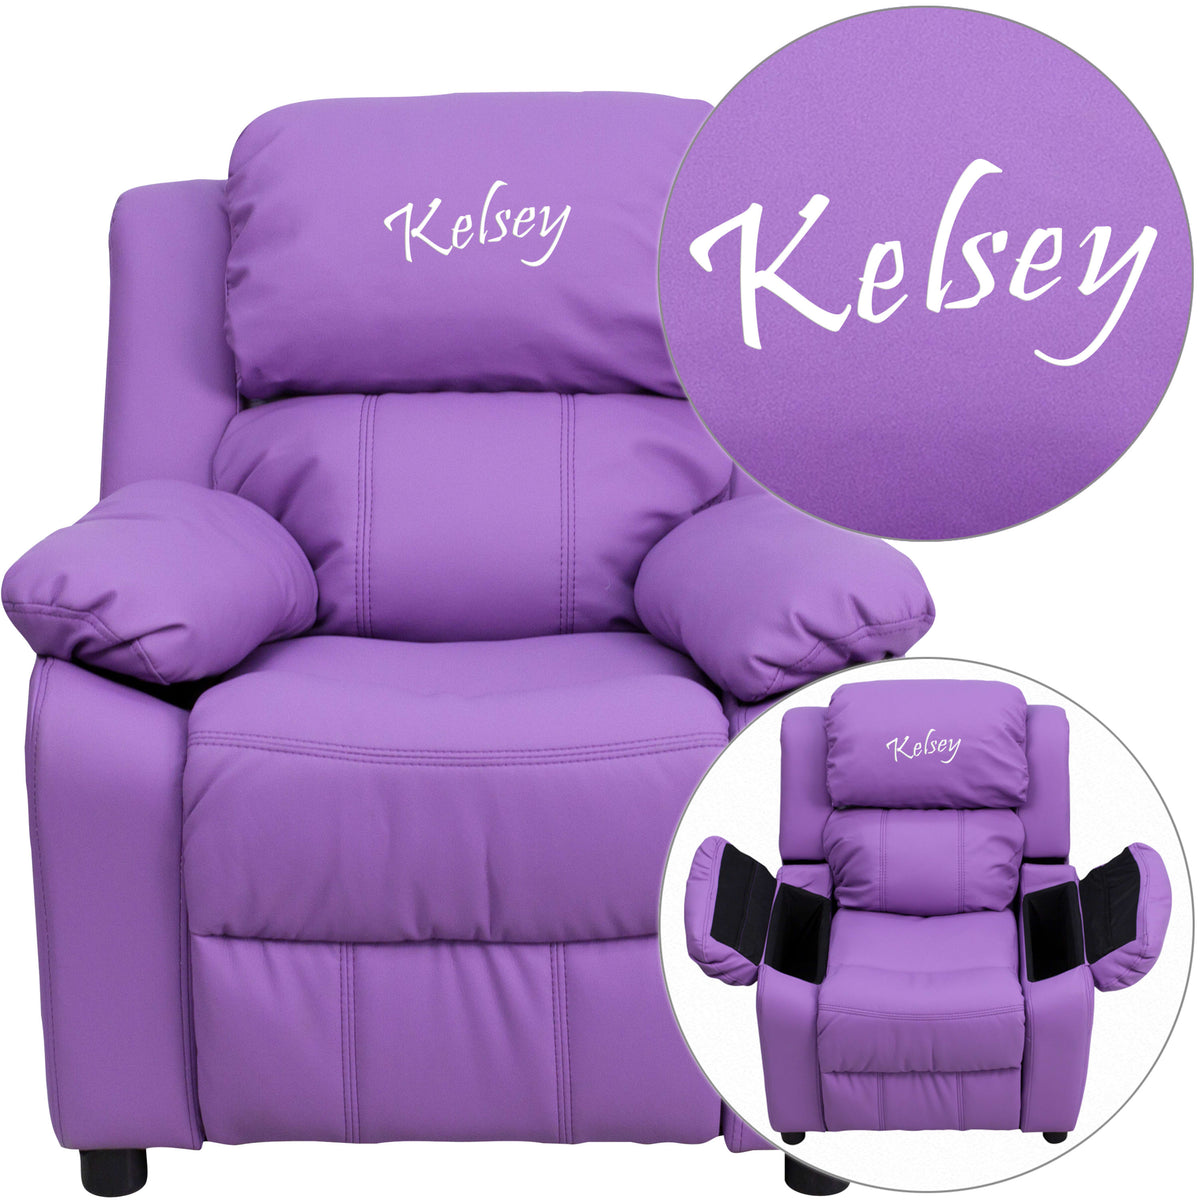 Lavender Vinyl |#| Personalized Deluxe Padded Lavender Vinyl Kids Recliner with Storage Arms